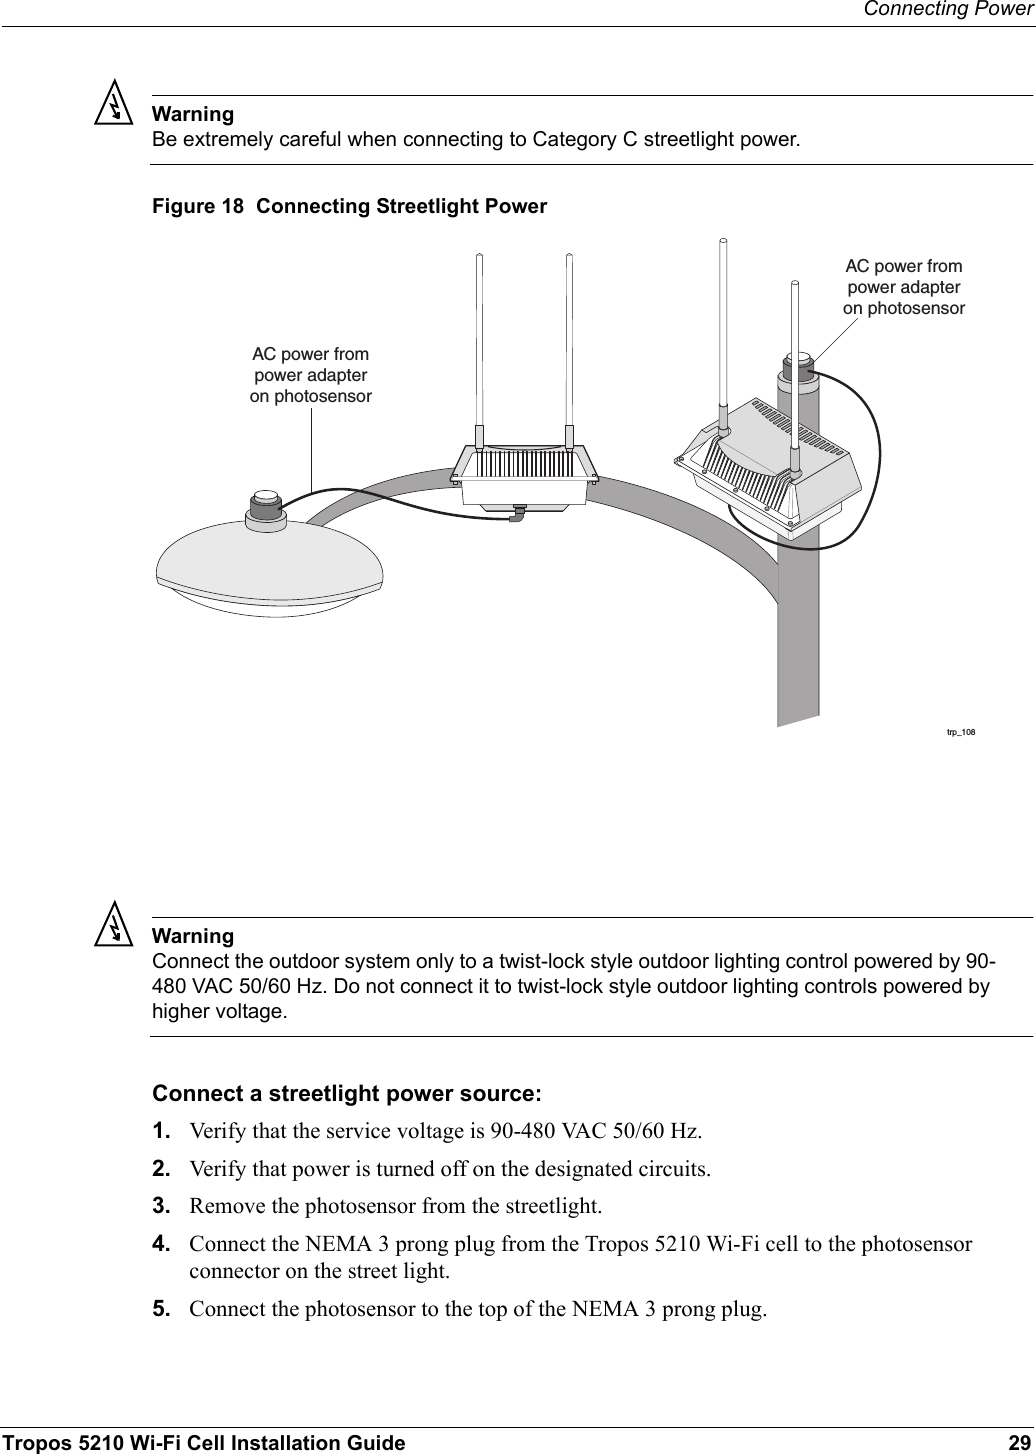 Connecting PowerTropos 5210 Wi-Fi Cell Installation Guide 29WarningBe extremely careful when connecting to Category C streetlight power. Figure 18  Connecting Streetlight PowerWarningConnect the outdoor system only to a twist-lock style outdoor lighting control powered by 90-480 VAC 50/60 Hz. Do not connect it to twist-lock style outdoor lighting controls powered by higher voltage.Connect a streetlight power source:1. Verify that the service voltage is 90-480 VAC 50/60 Hz.2. Verify that power is turned off on the designated circuits.3. Remove the photosensor from the streetlight.4. Connect the NEMA 3 prong plug from the Tropos 5210 Wi-Fi cell to the photosensor connector on the street light.5. Connect the photosensor to the top of the NEMA 3 prong plug.trp_108AC power frompower adapteron photosensorAC power frompower adapteron photosensor